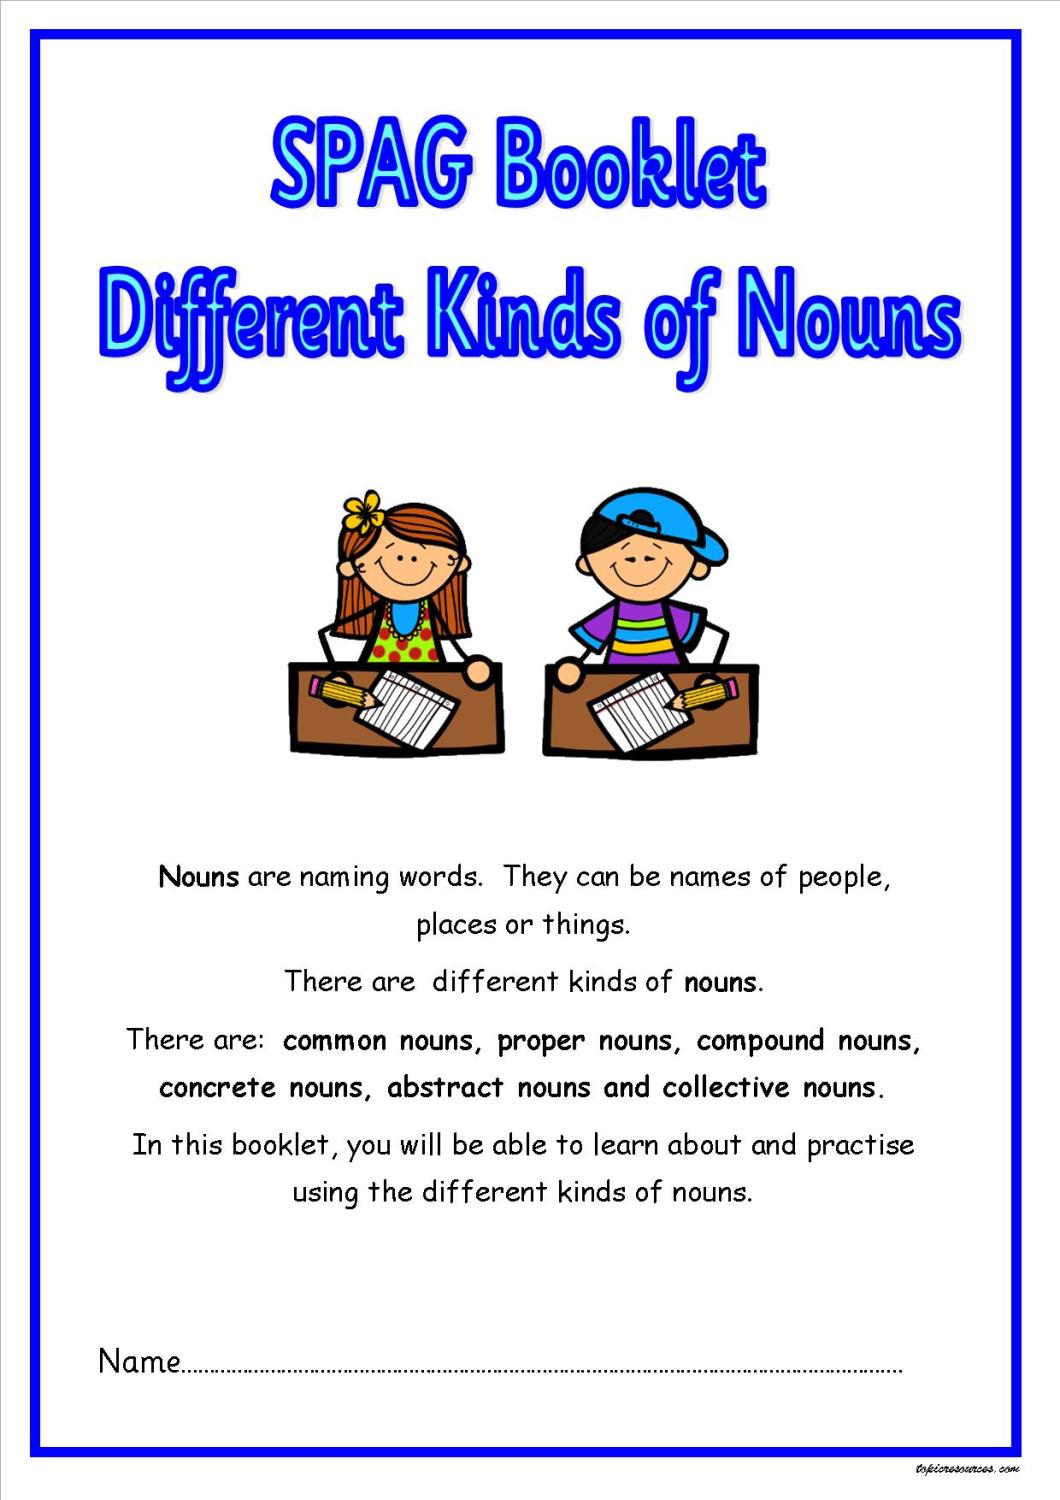 KS2 SPAG activity booklet focusing on the various noun types. 